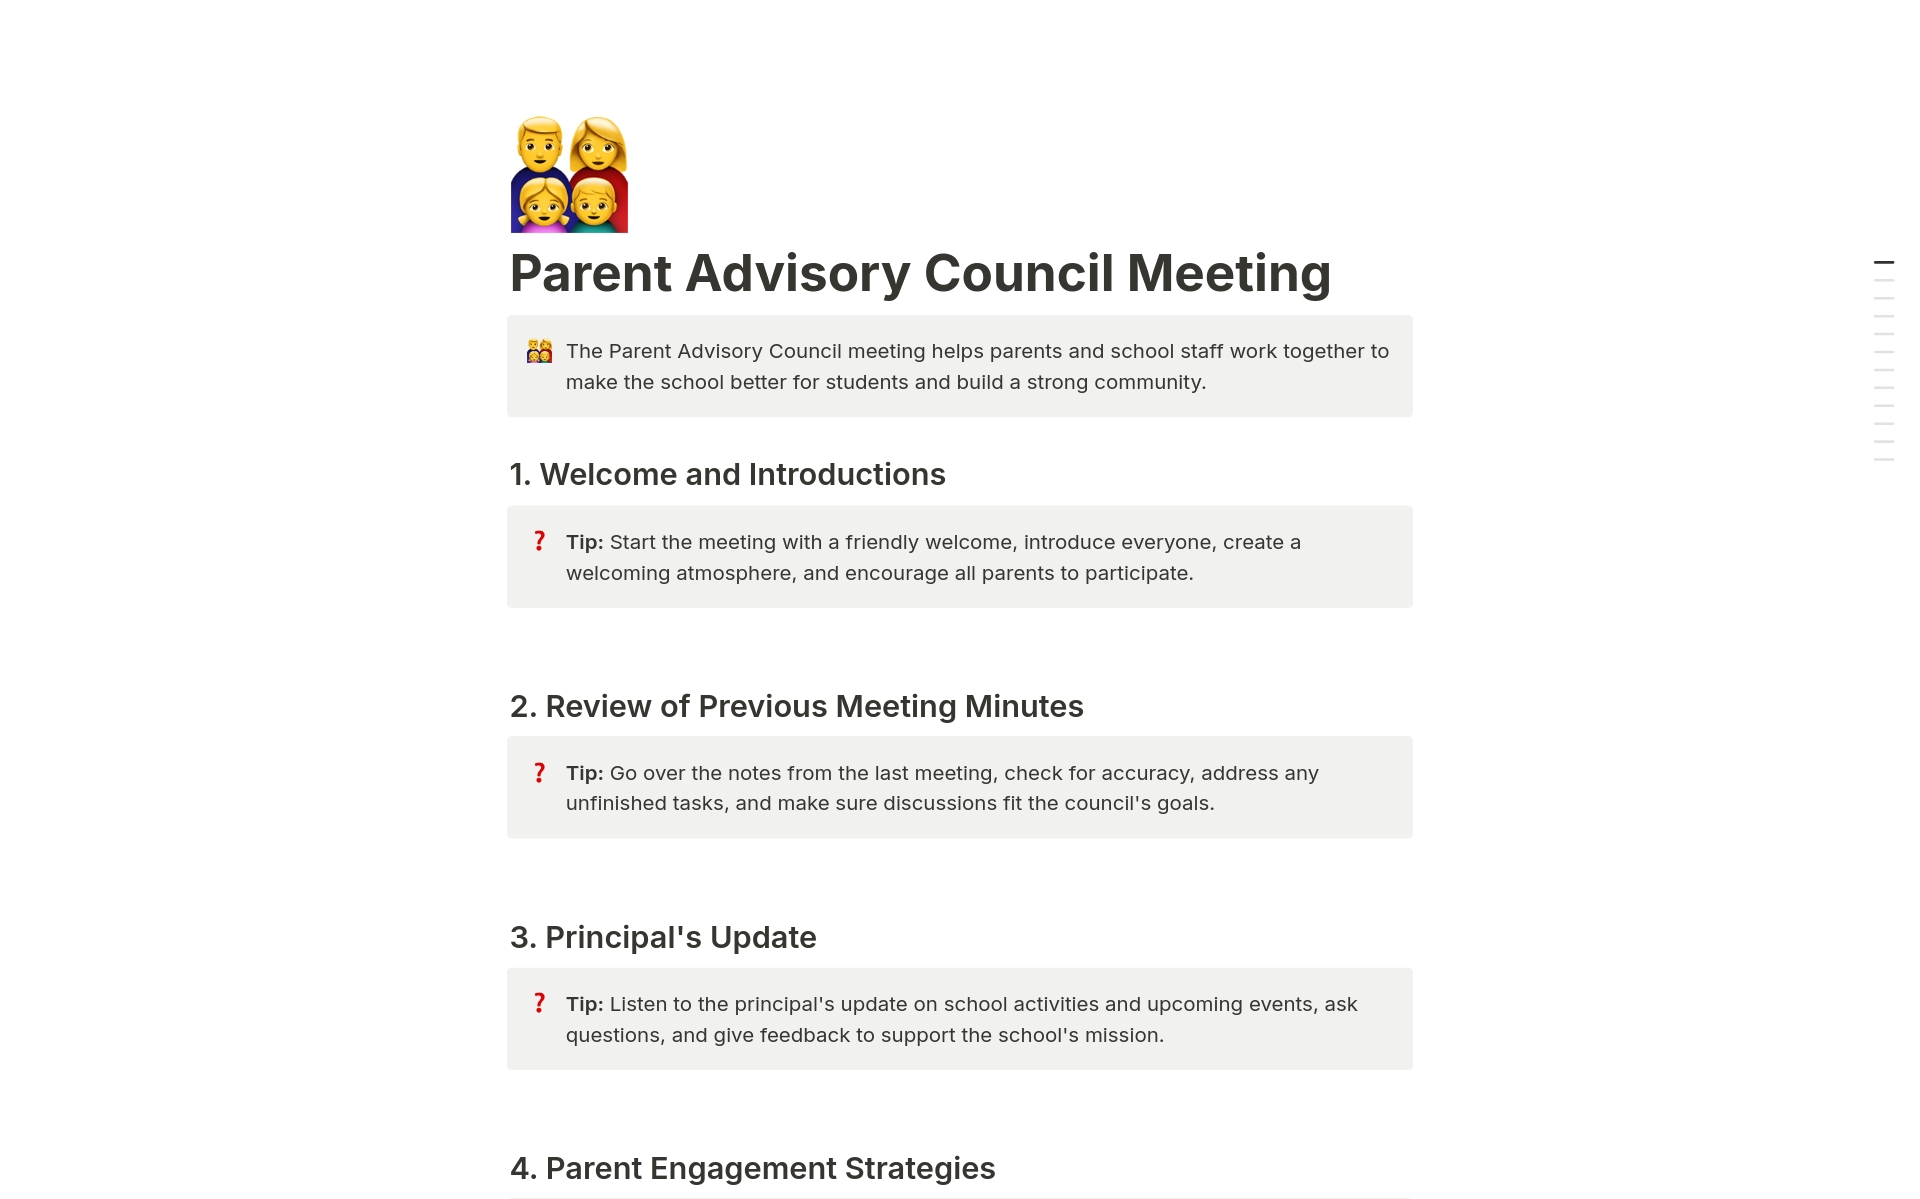 The Parent Advisory Council meeting helps parents and school staff work together to make the school better for students and build a strong community.